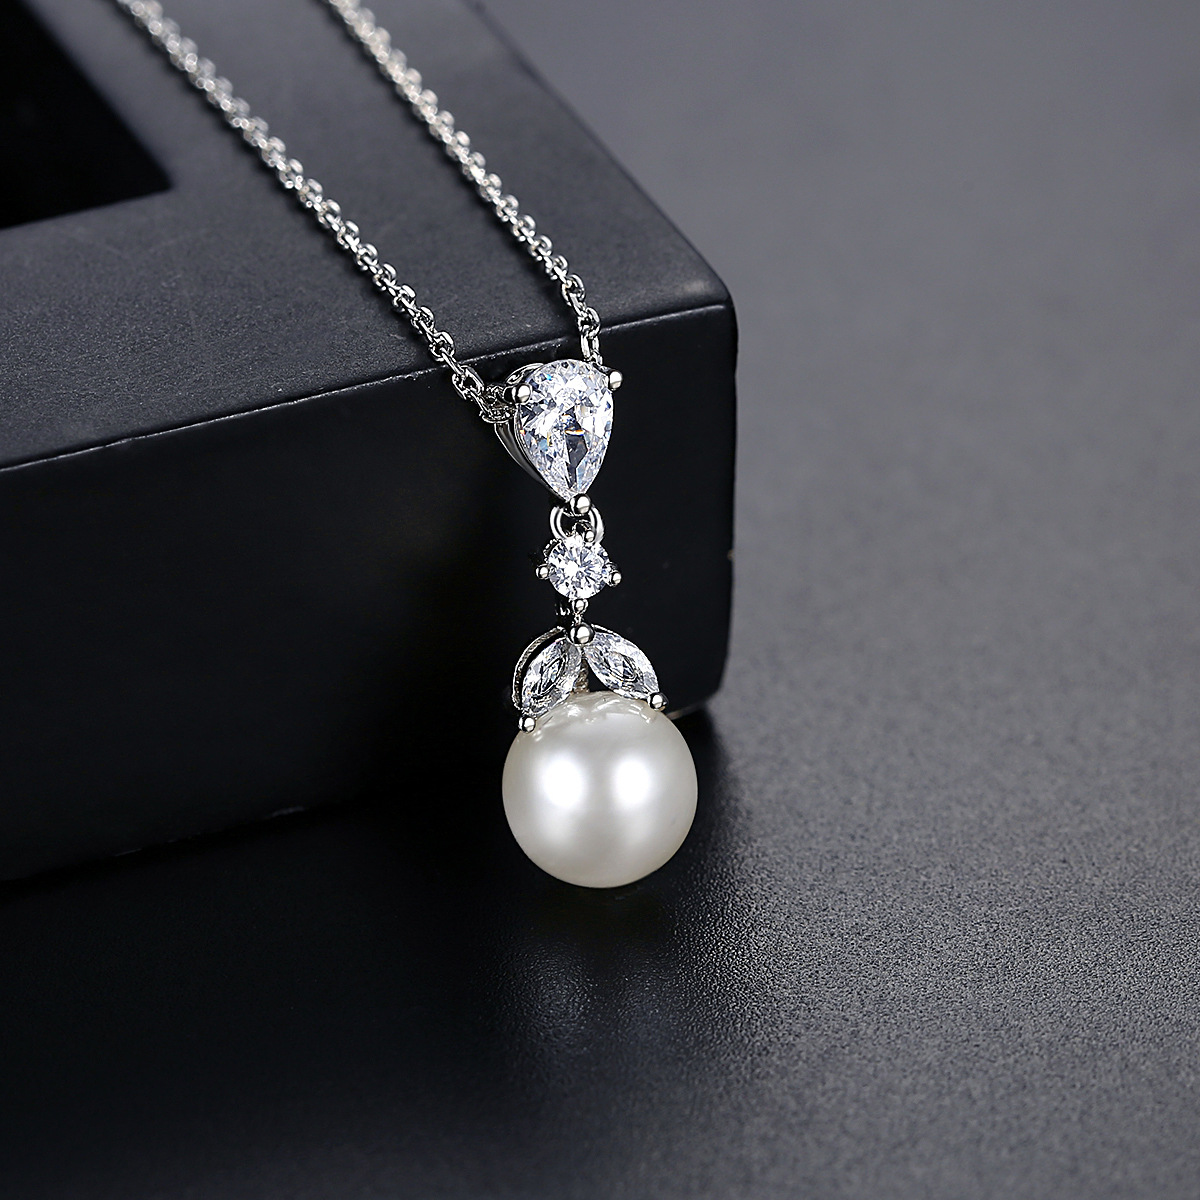 Korean style pendant sweet pearl necklace for women